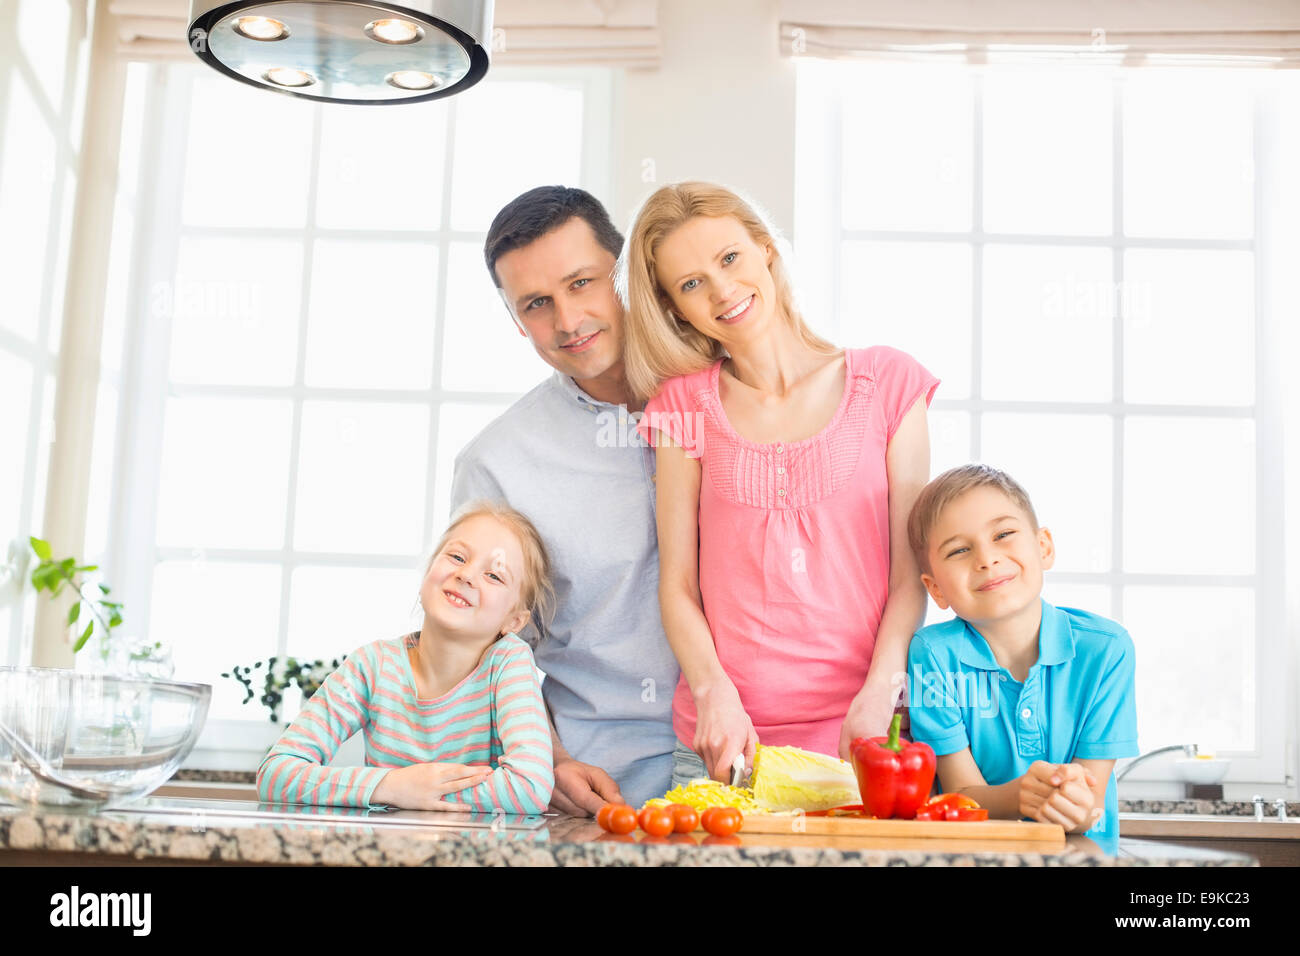 Portrait of happy family preparing food in kitchen Banque D'Images